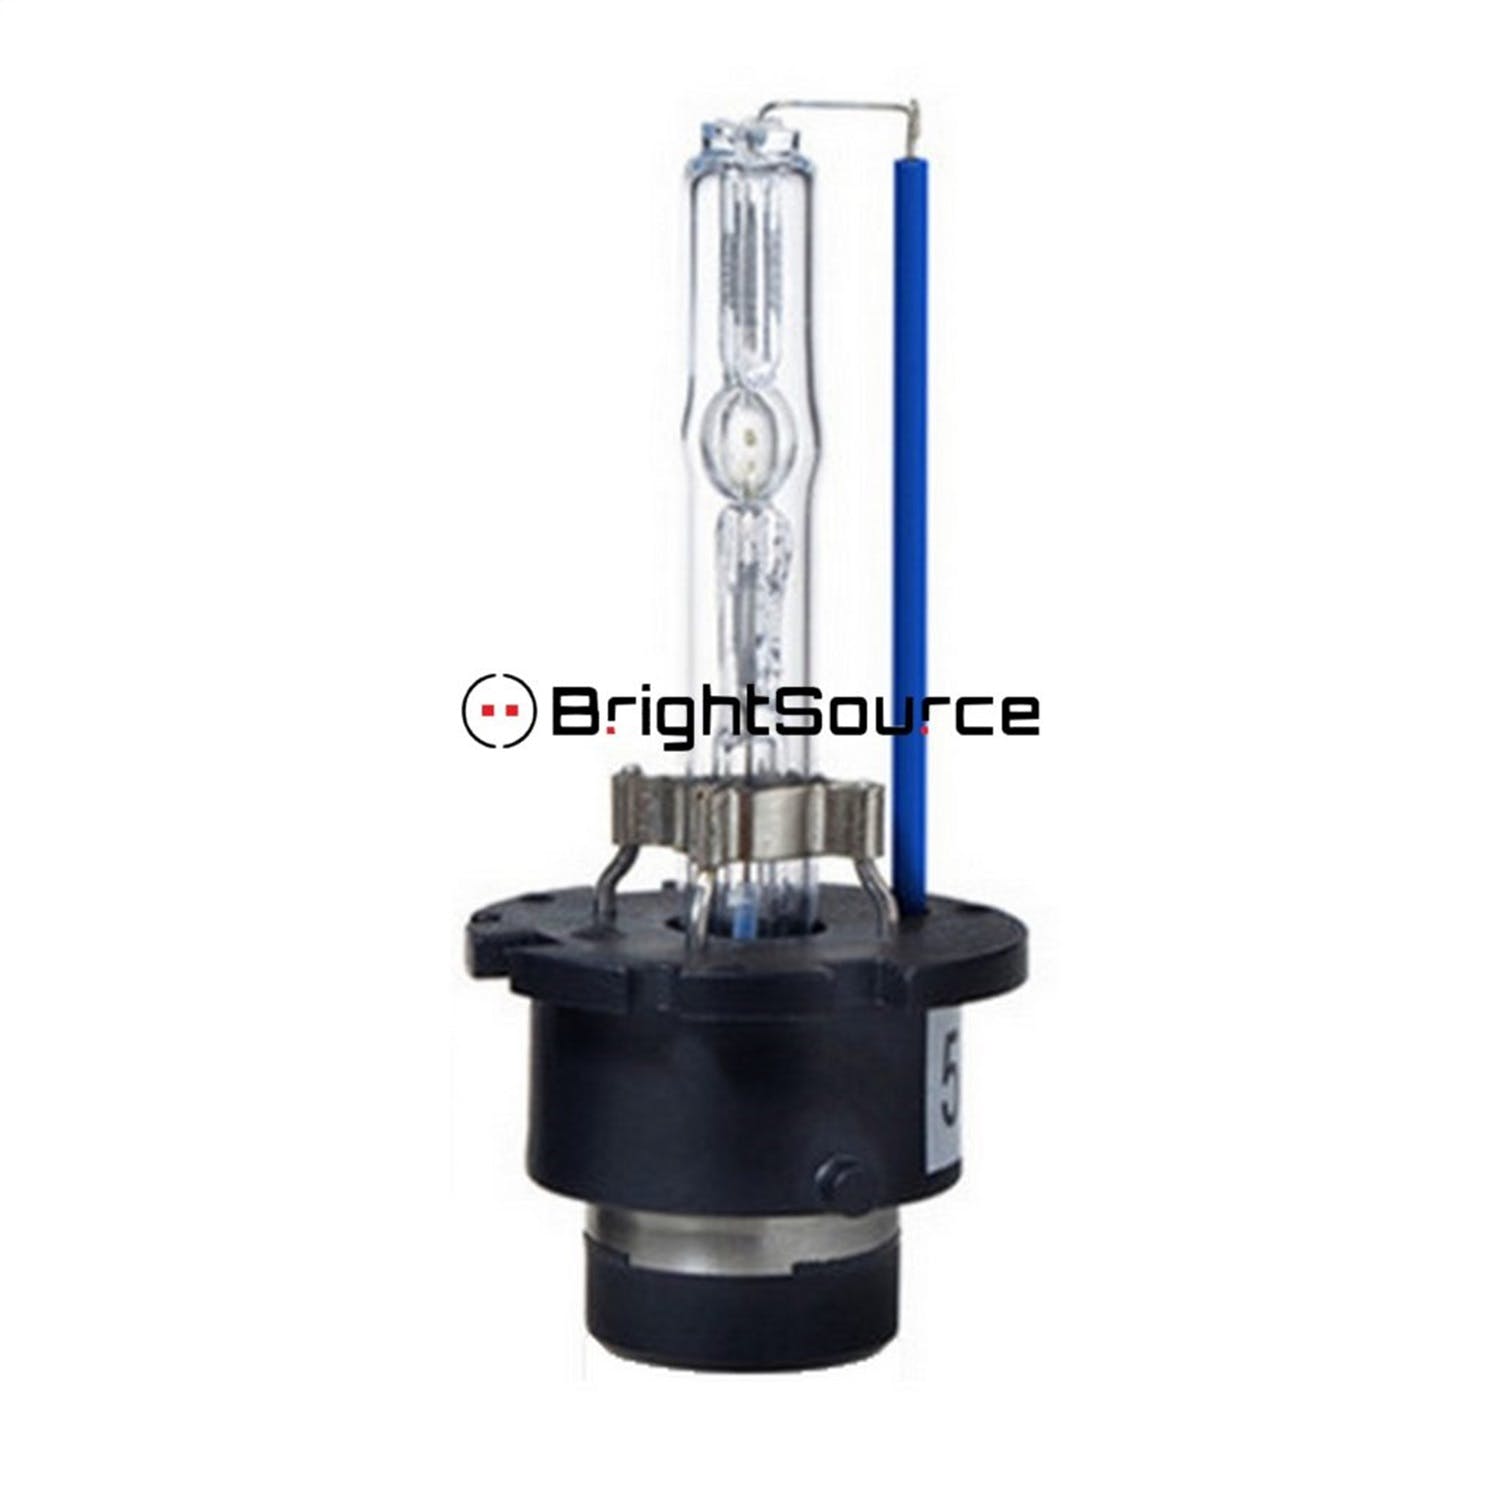 BrightSource D4S43 Single D4 OE Replacement/Upgrade Bulb 4300K